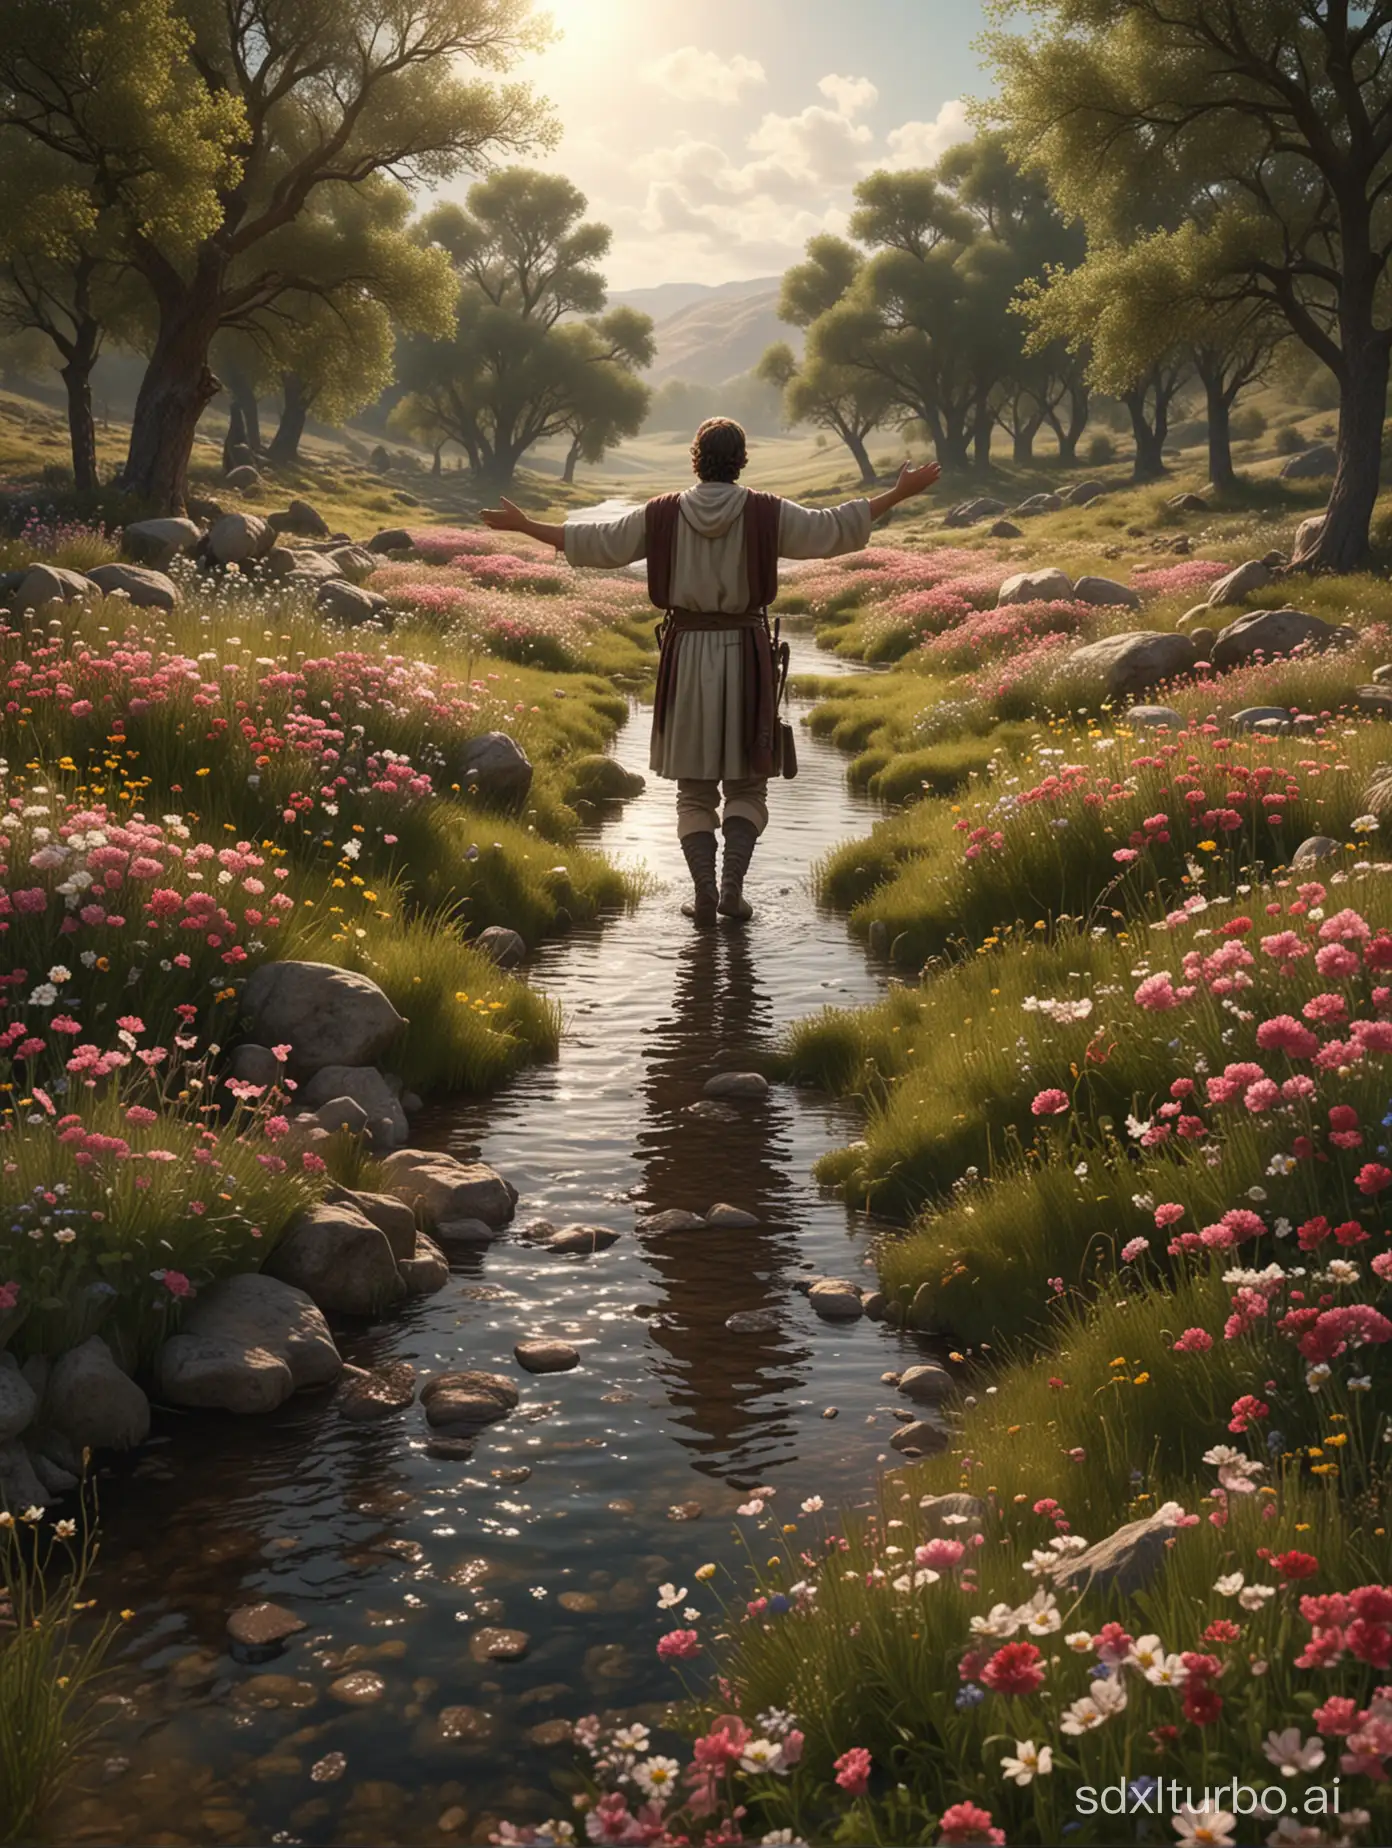 Ultra realistic biblical image with reference to Psalm 23 landscape with a flowery field and a peaceful stream with a biblical man with his arms outstretched, receiving God's provision in 8k format